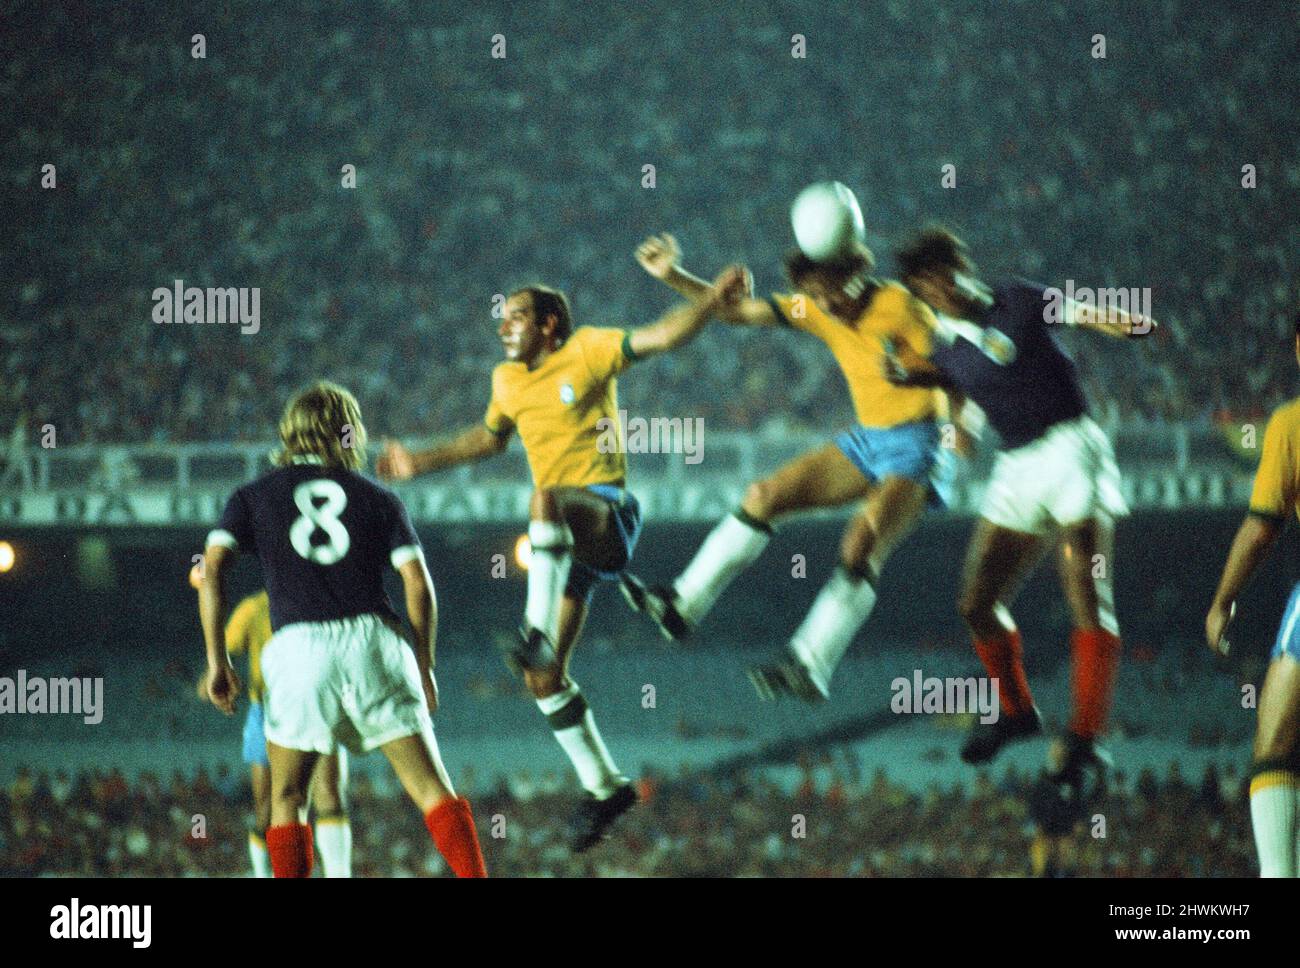 Brazil 1-0 Scotland, 1972 Brazil Independence Cup, final stage, Group A match at the Estadio do Maracana, Rio de Janeiro, Brazil, Wednesday 5th July 1972. Pictured, match action Stock Photo